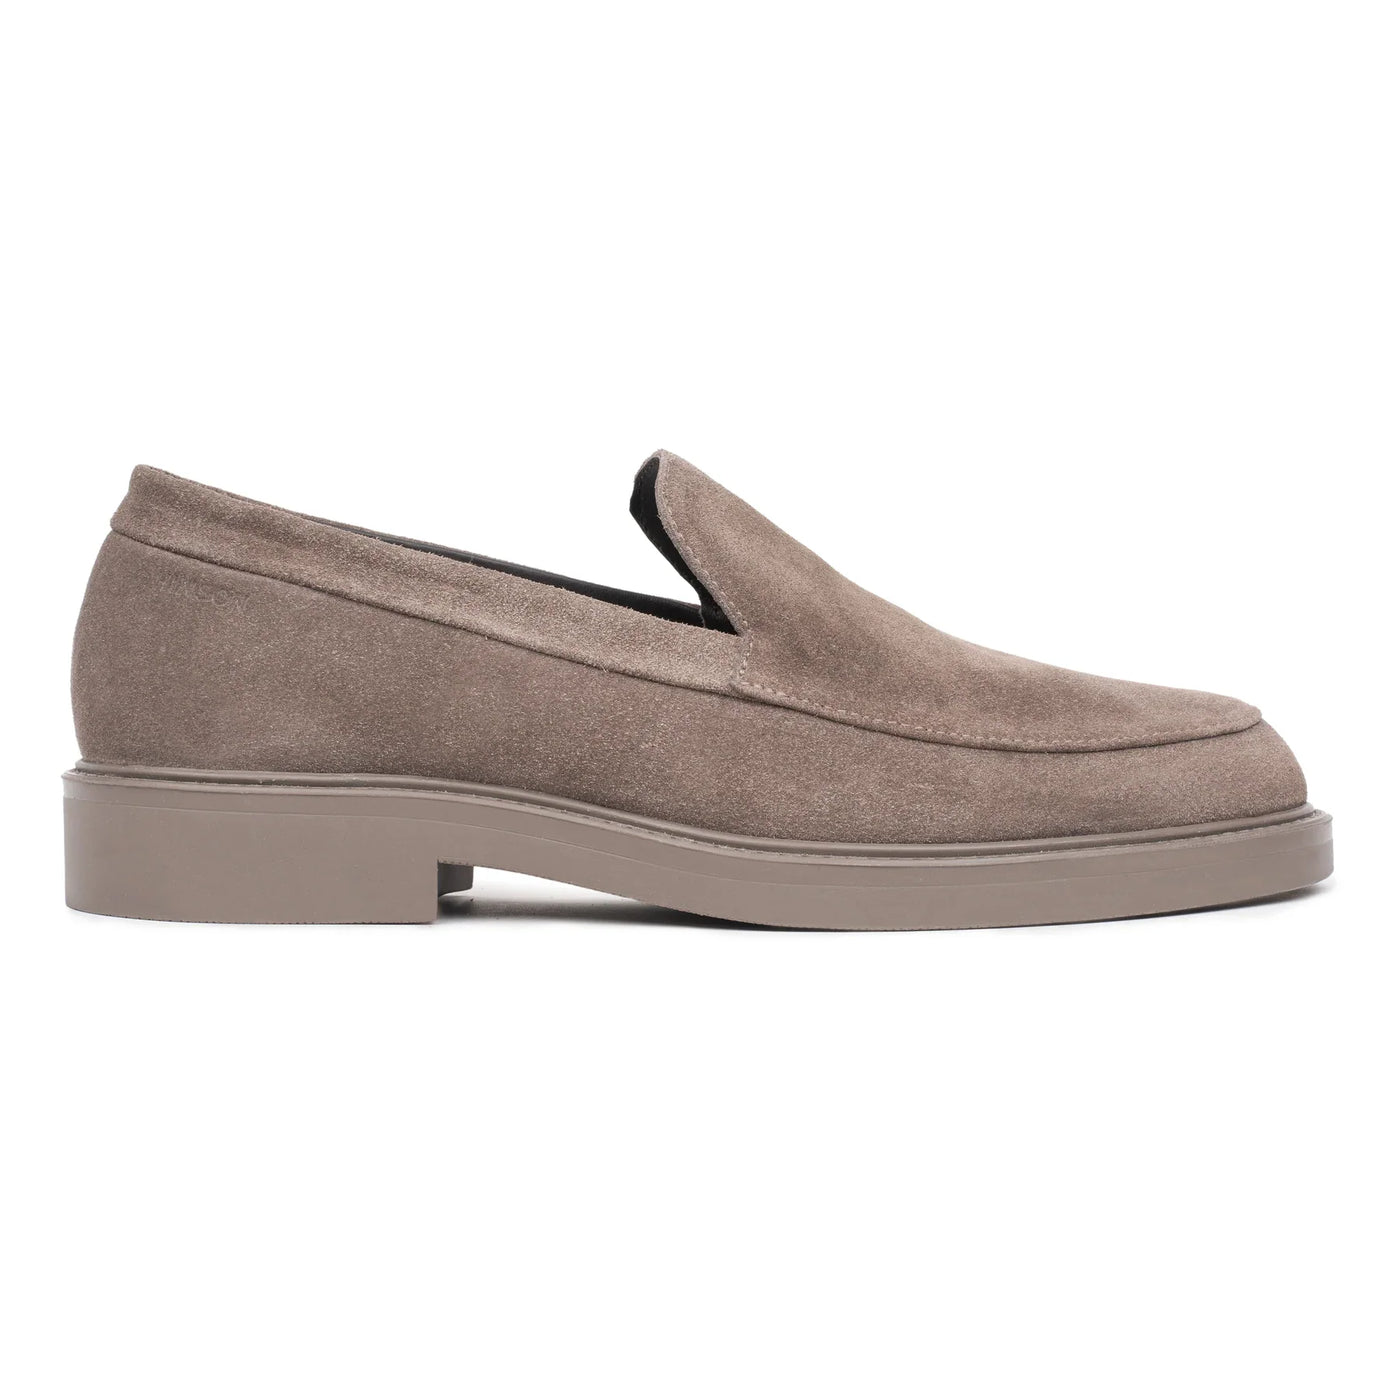 BEATENBERG LOAFER ECHO Taupe Suede - HINSON | ALPINA